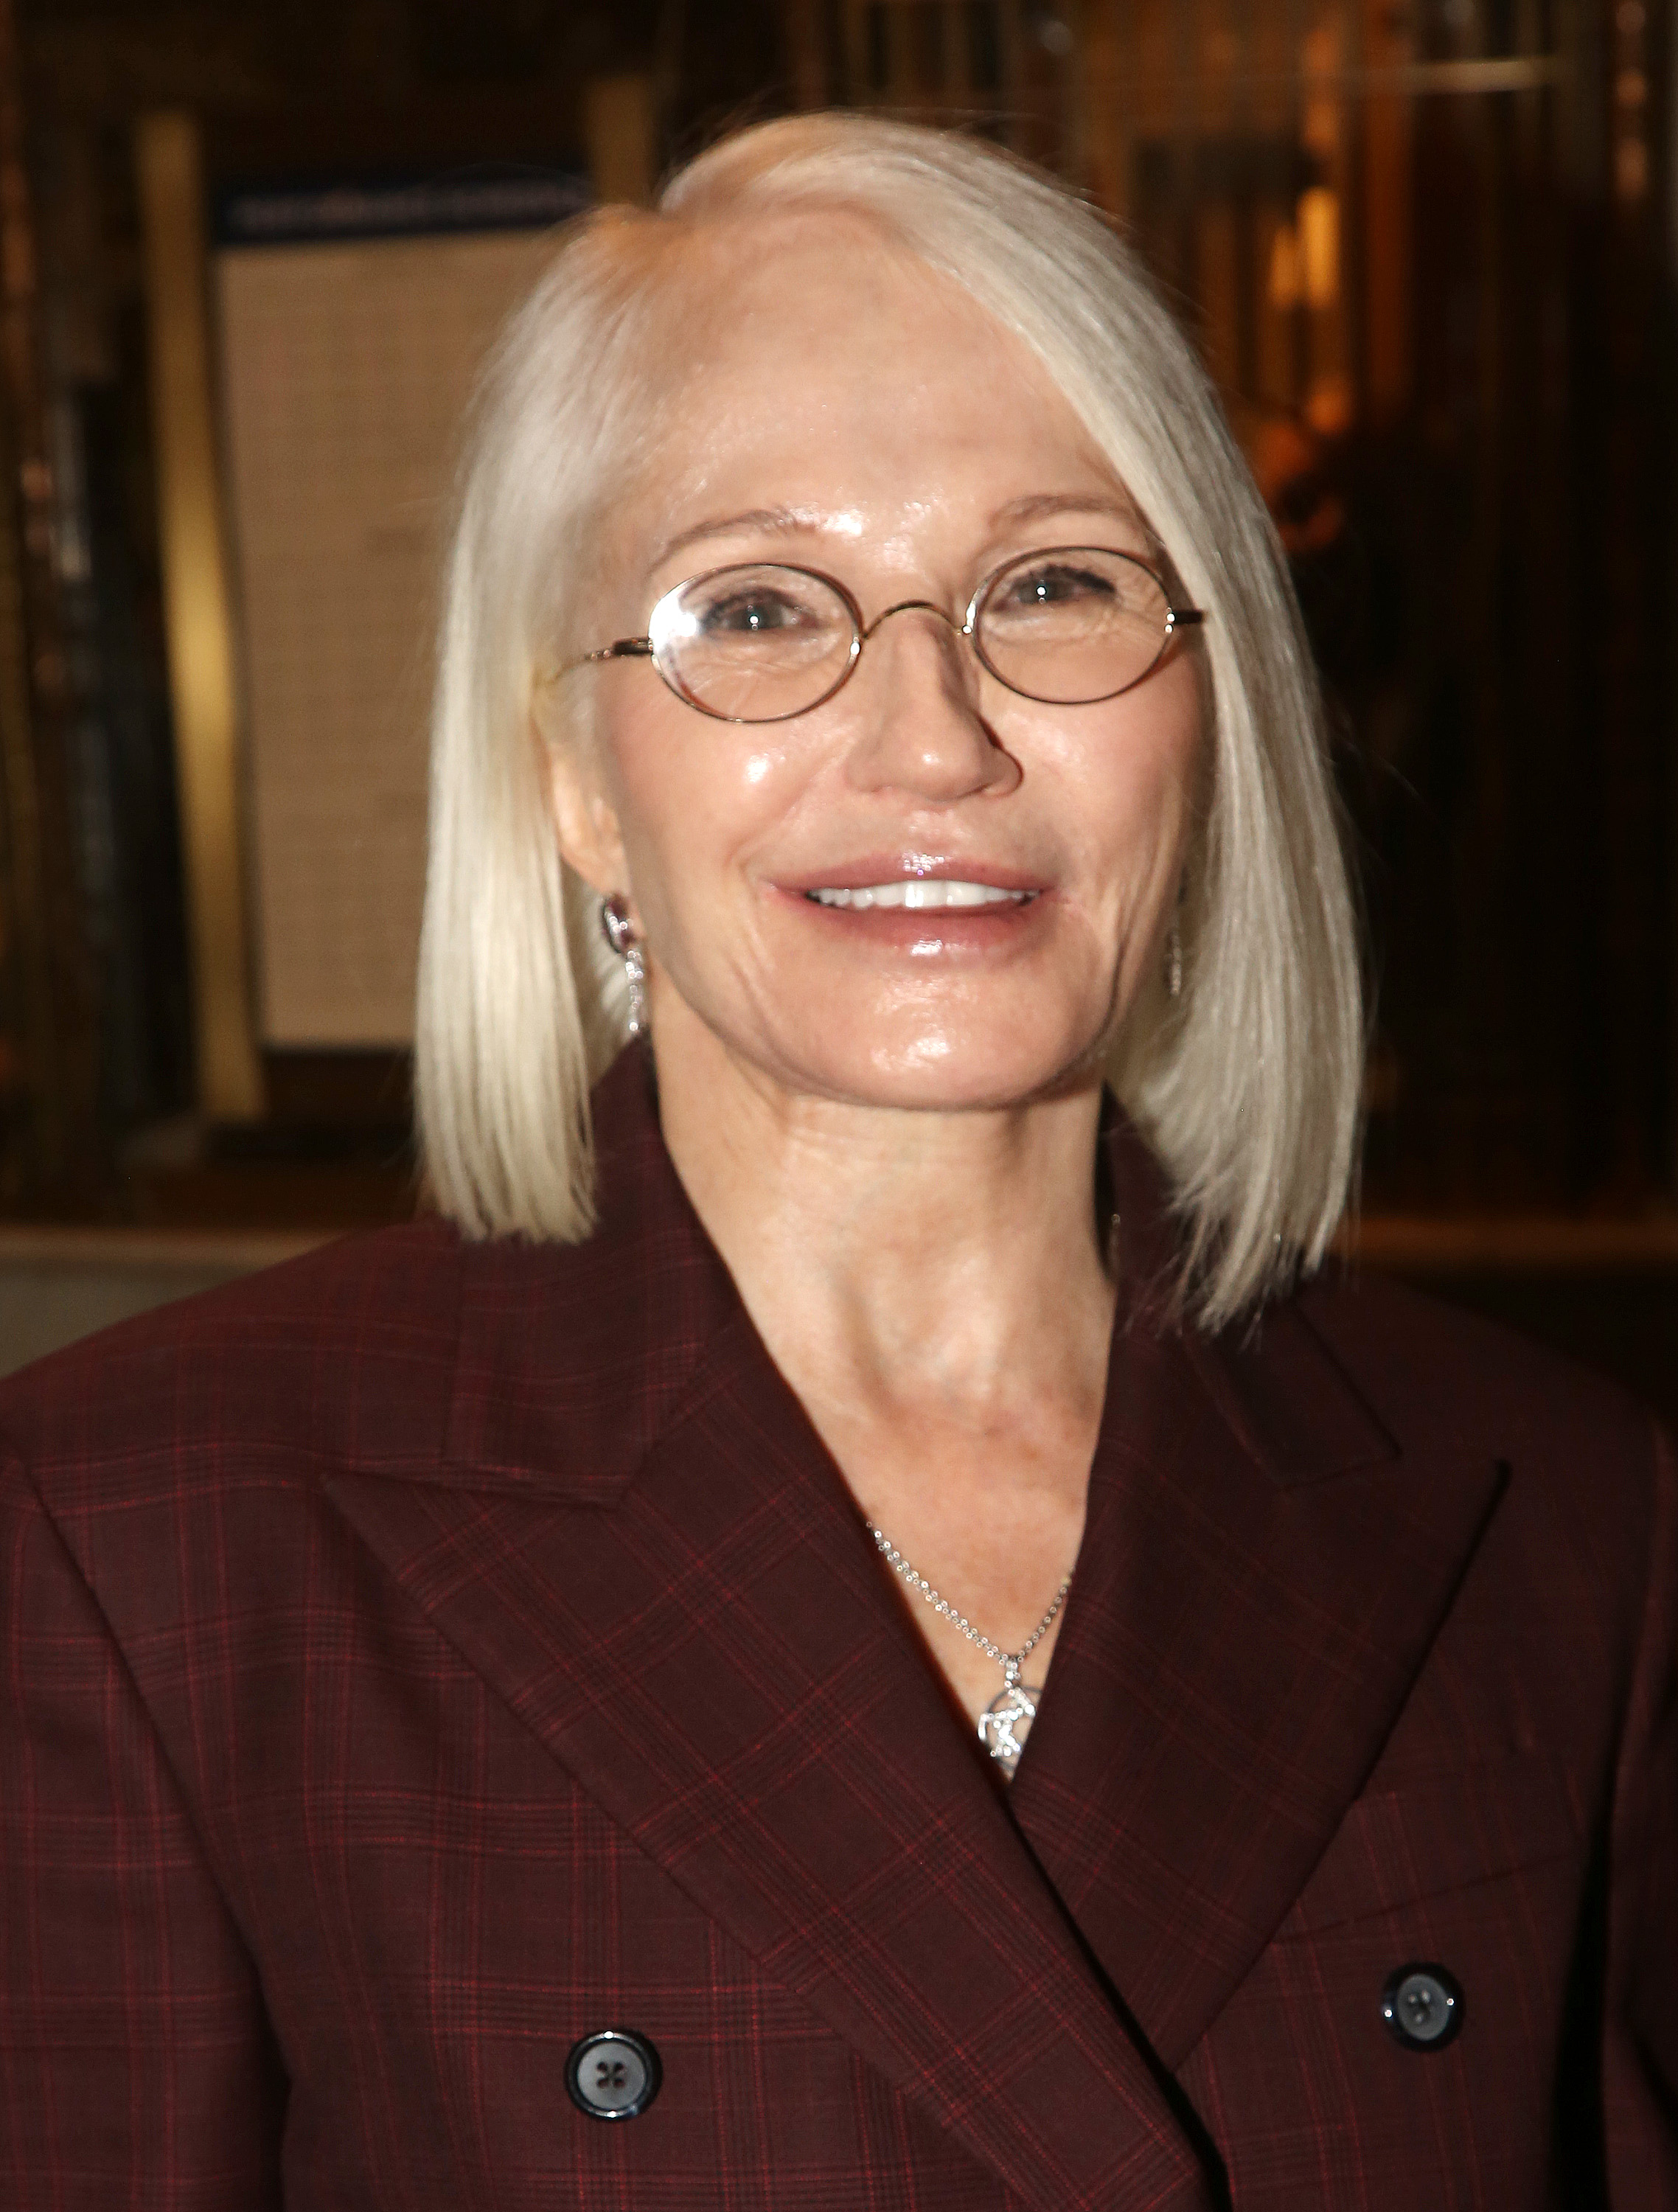 Ellen Barkin pictured at the opening night of "Walking with Ghosts" on Broadway at The Music Box Theatre on October 27, 2022 in New York City | Source: Getty Images